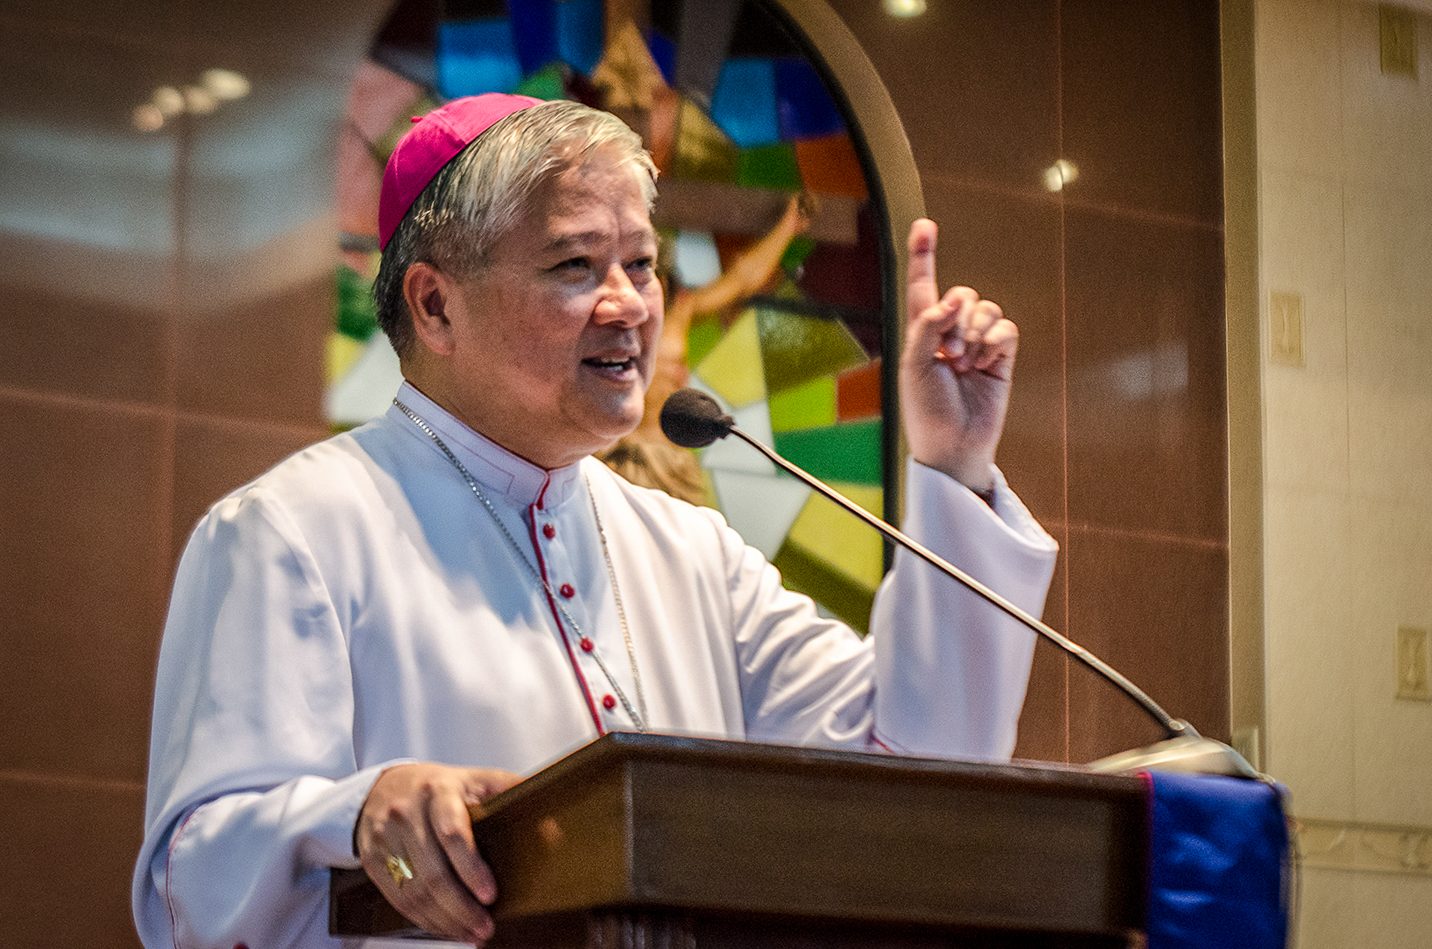 Archbishop Soc: Blessing same-sex couples for mercy, not sanctification